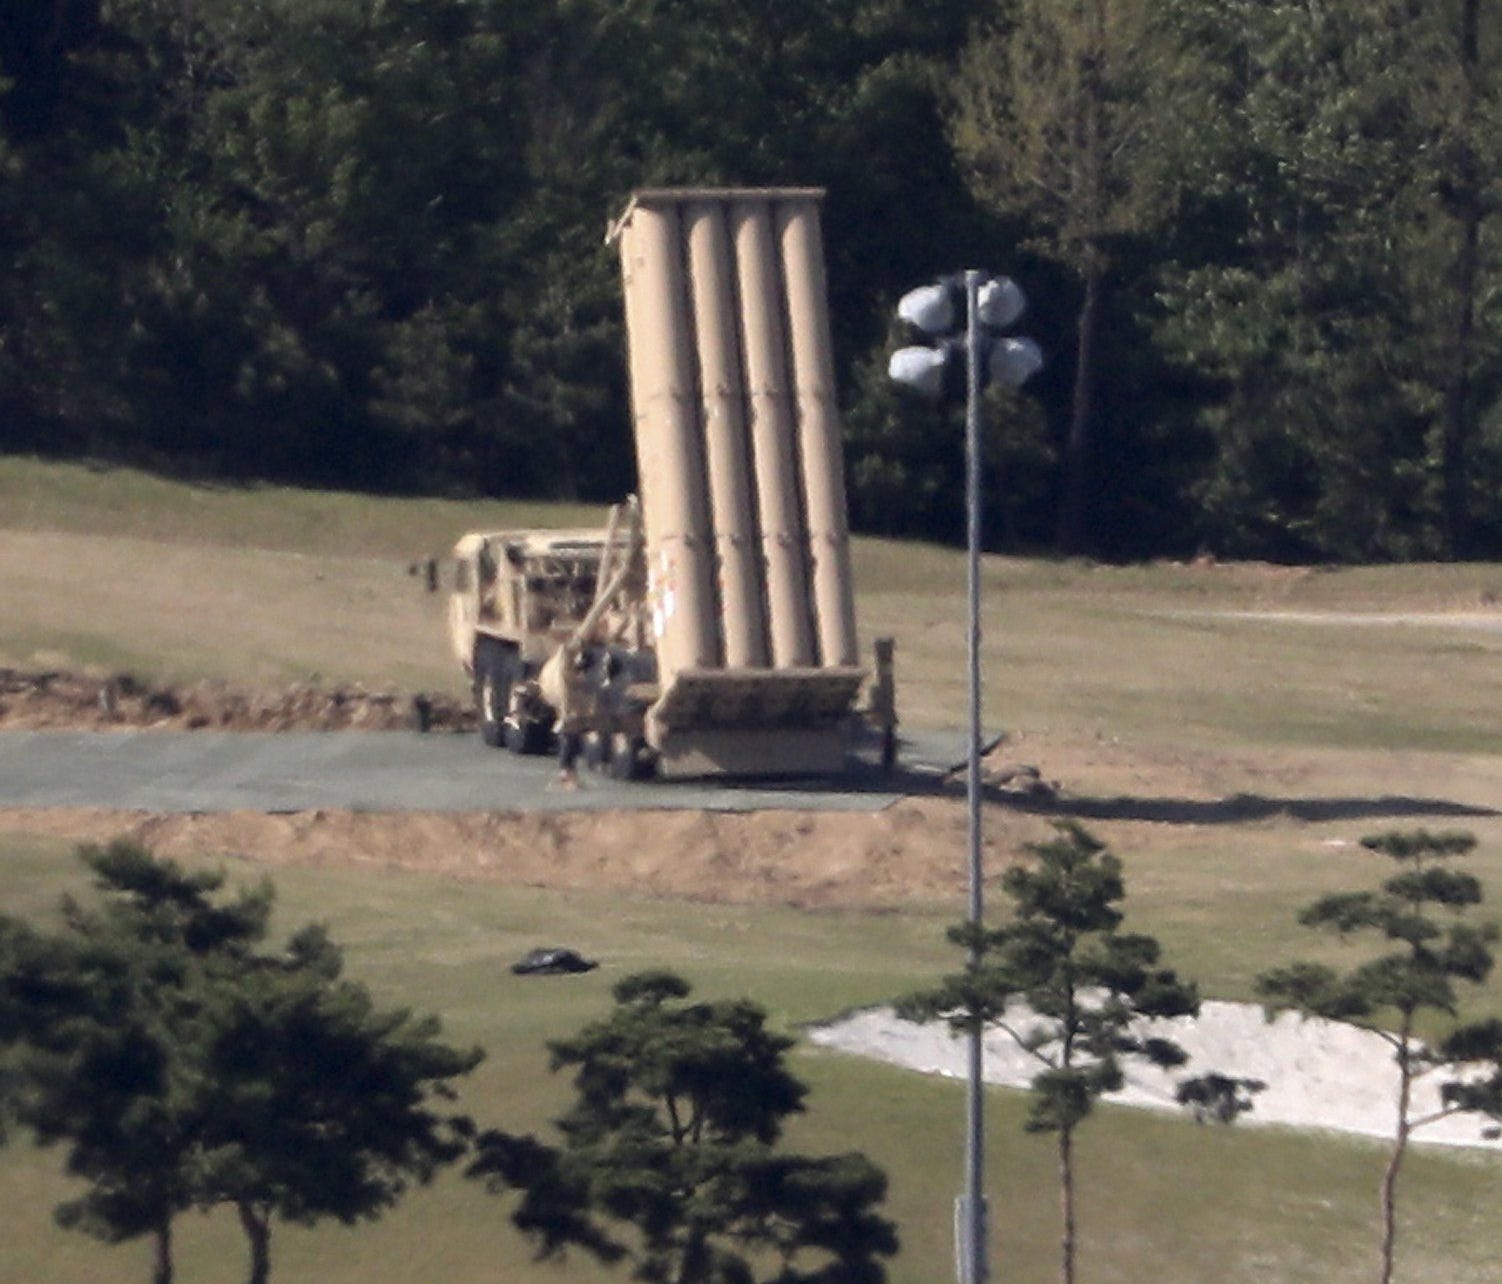 (FILE) - A Terminal High Altitude Area Defense (THAAD) launcher sits at a golf course in Seongju, some 300km southeast of Seoul, South Korea, May 1, 2017.